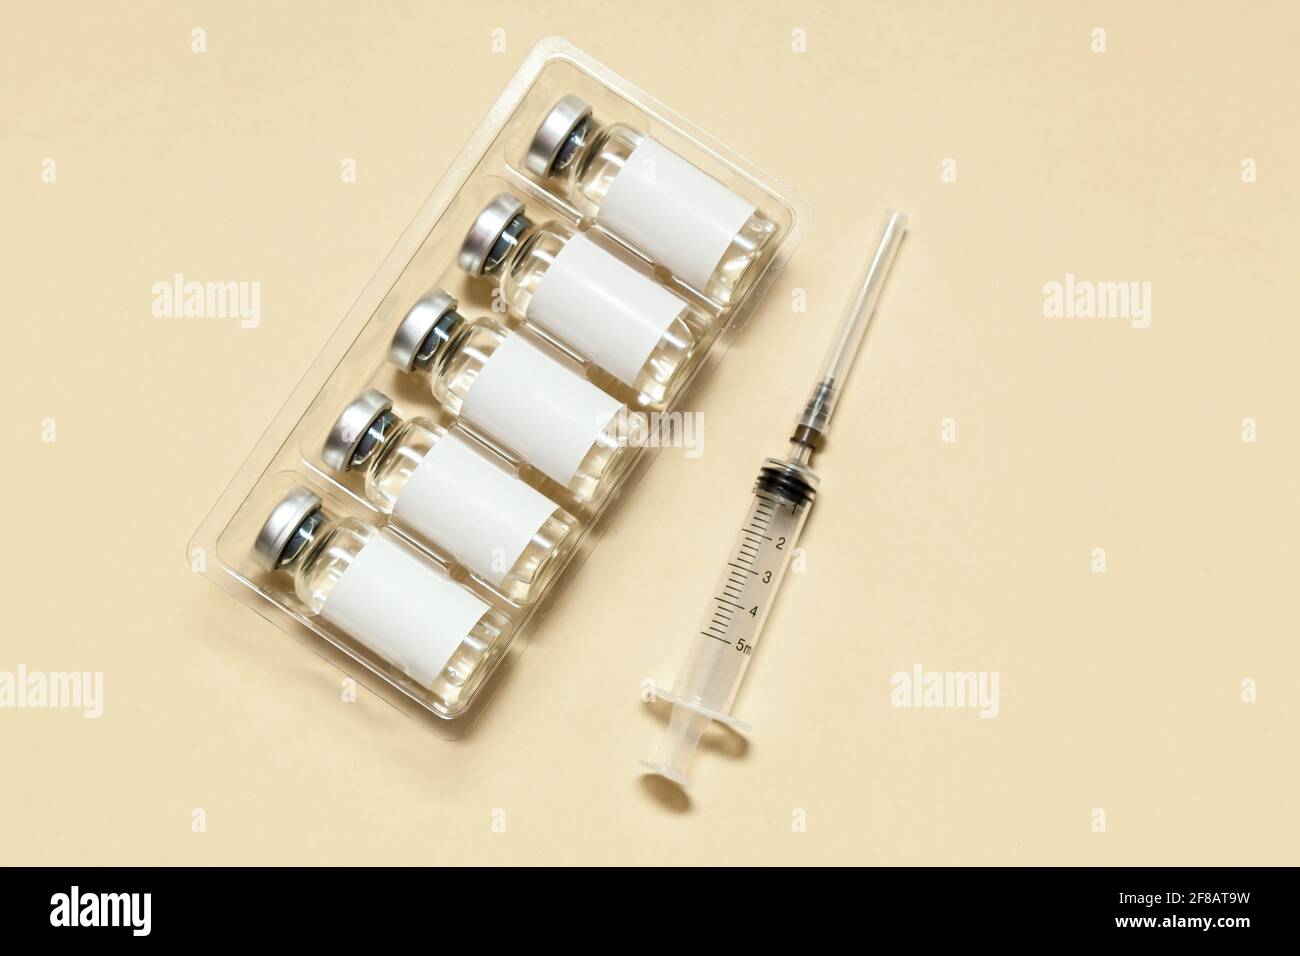 Syringe with vaccine in bubbles and stickers without inscription on a beige background. Medicine concept. Photo with place for your text and design.No Stock Photo